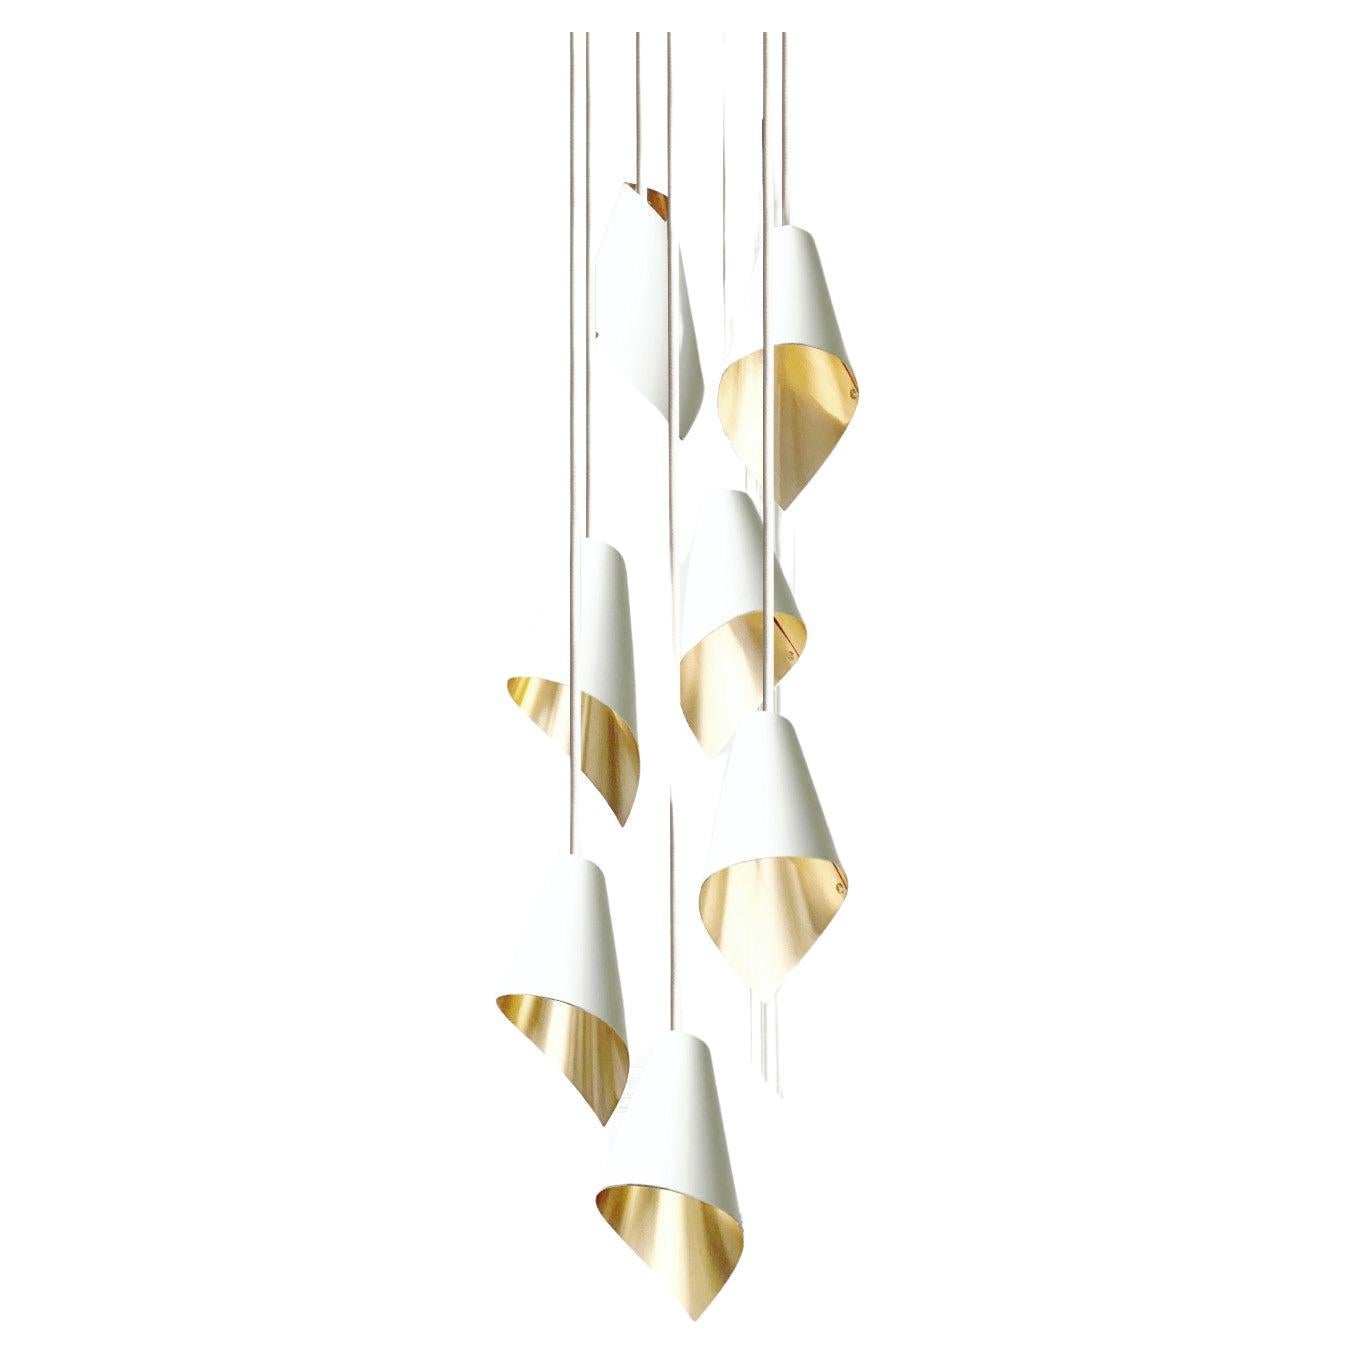 ARC 7 Modern Pendant Light in White and Brushed Brass Made in Britain